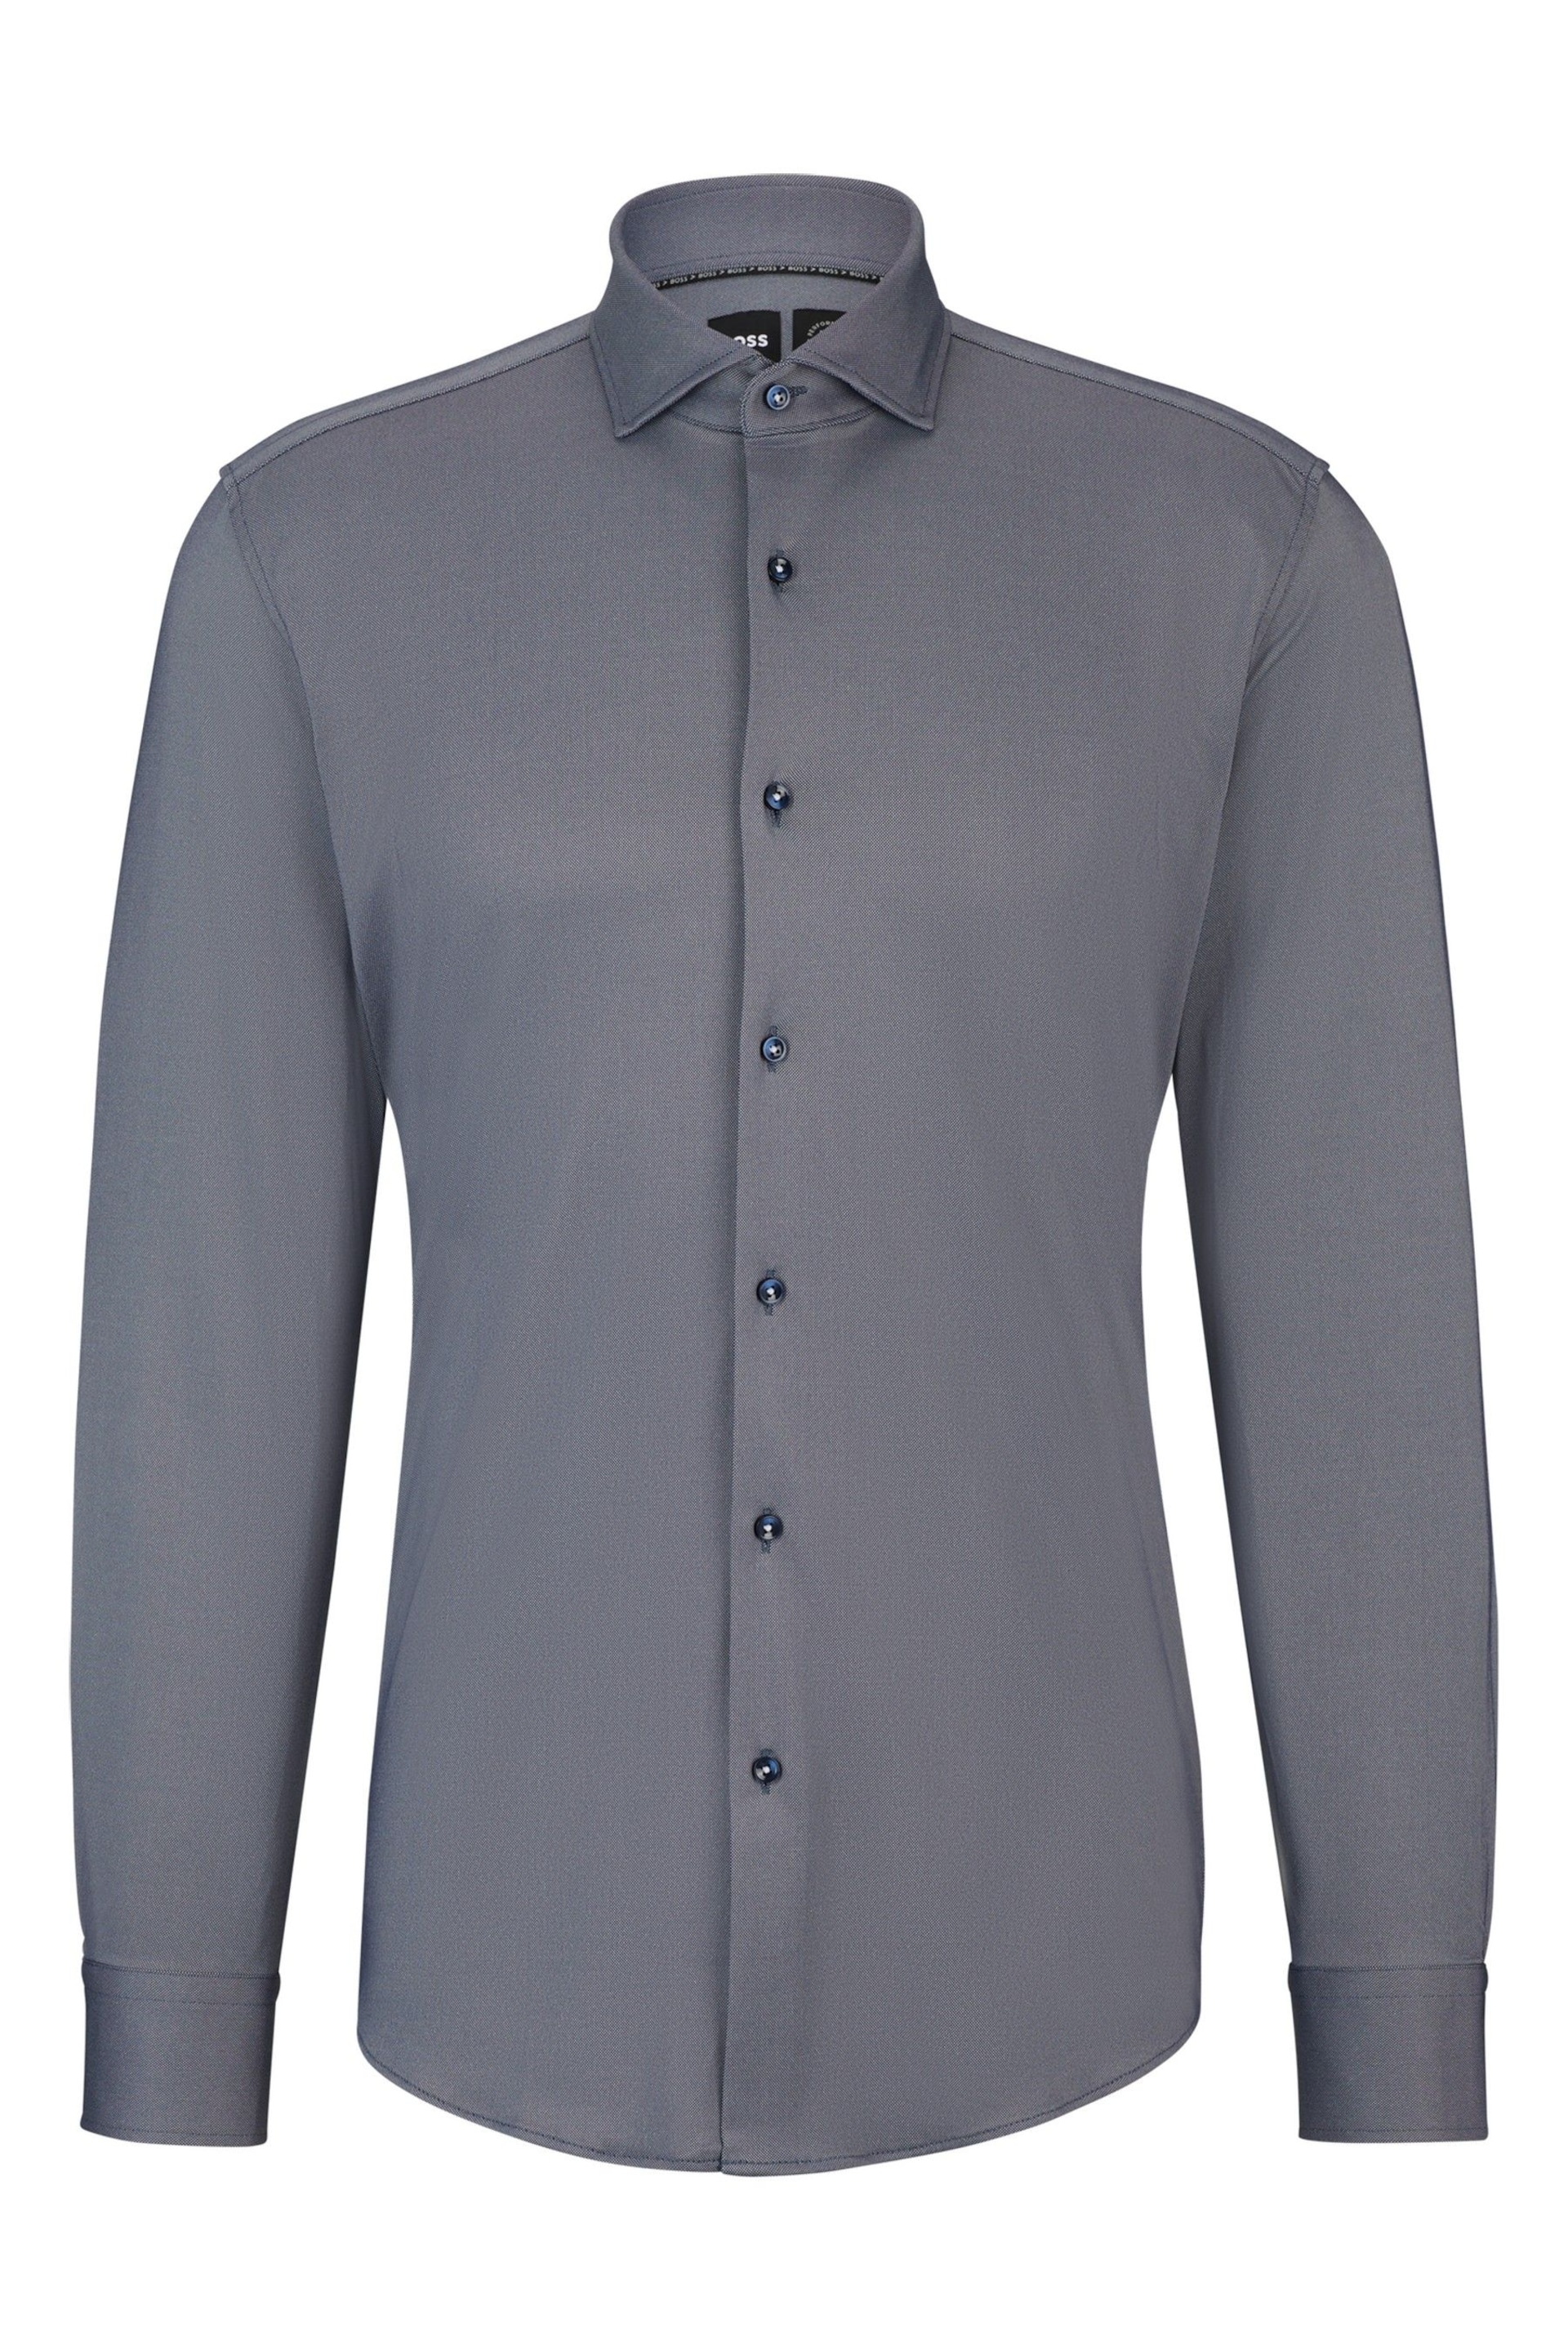 BOSS Blue Slim-Fit Shirt In Structured Performance-Stretch Fabric - Image 6 of 6